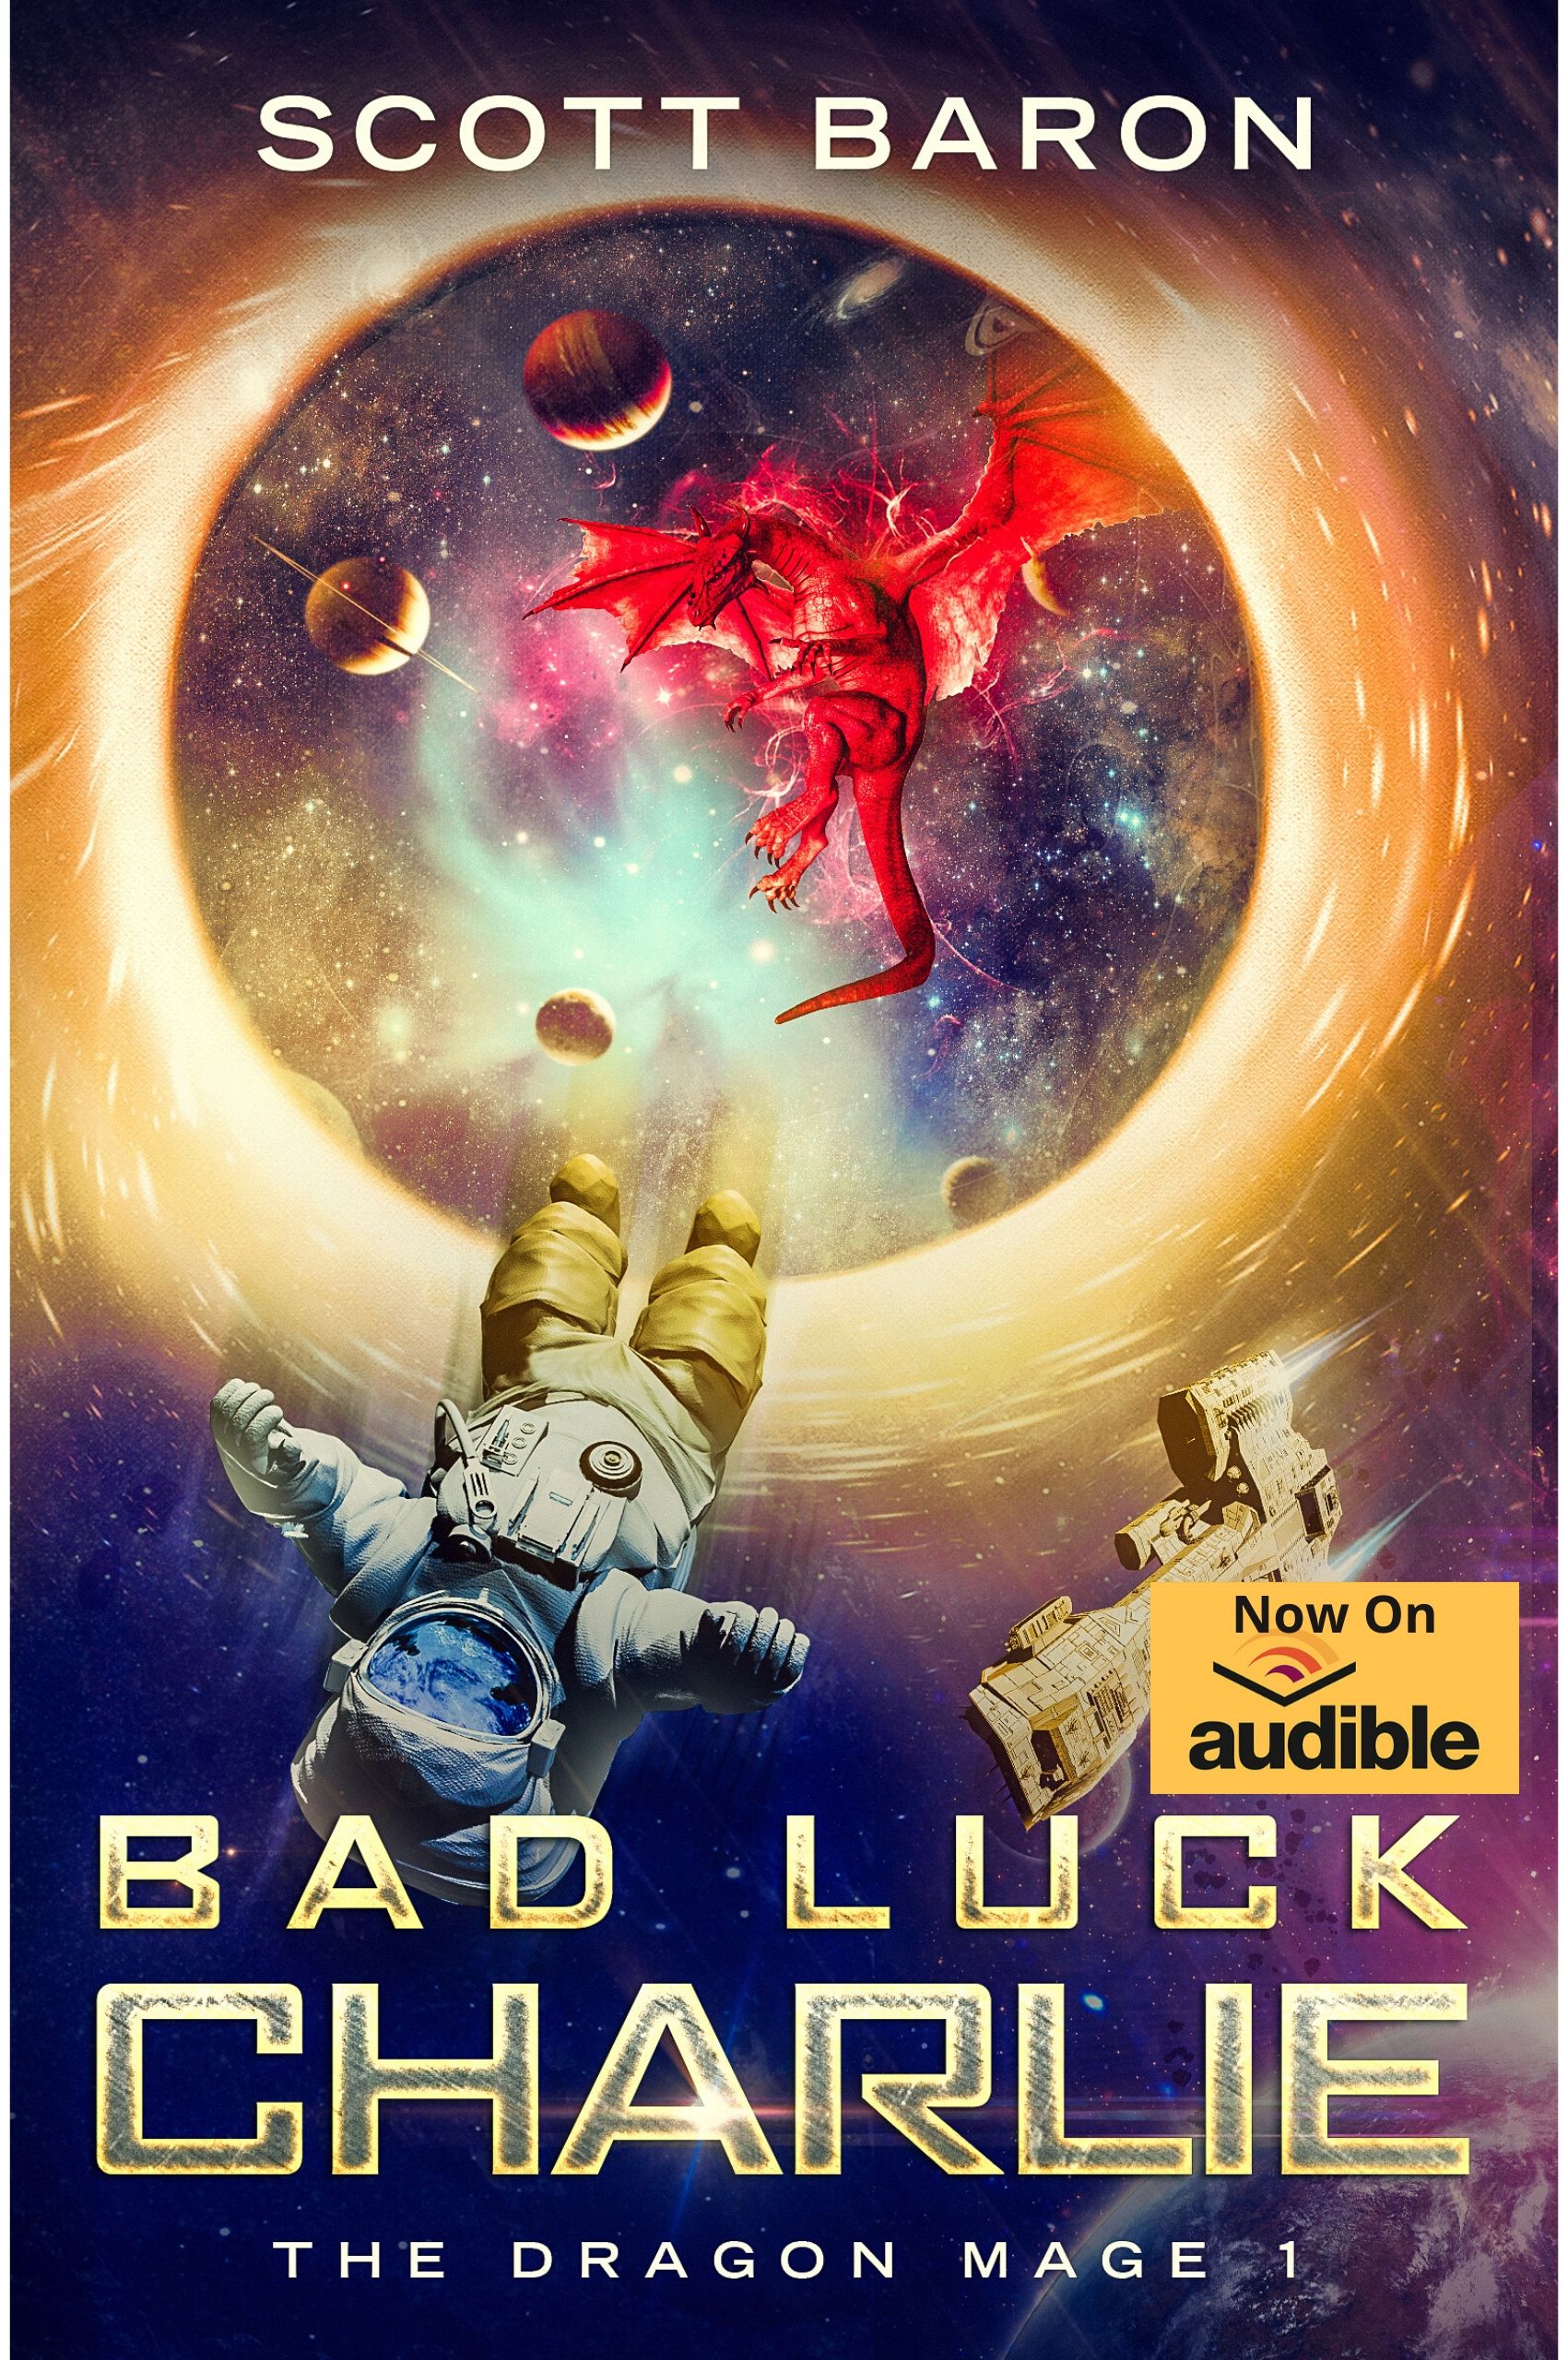 FREE: Bad Luck Charlie: The Dragon Mage Book 1 by Scott Baron